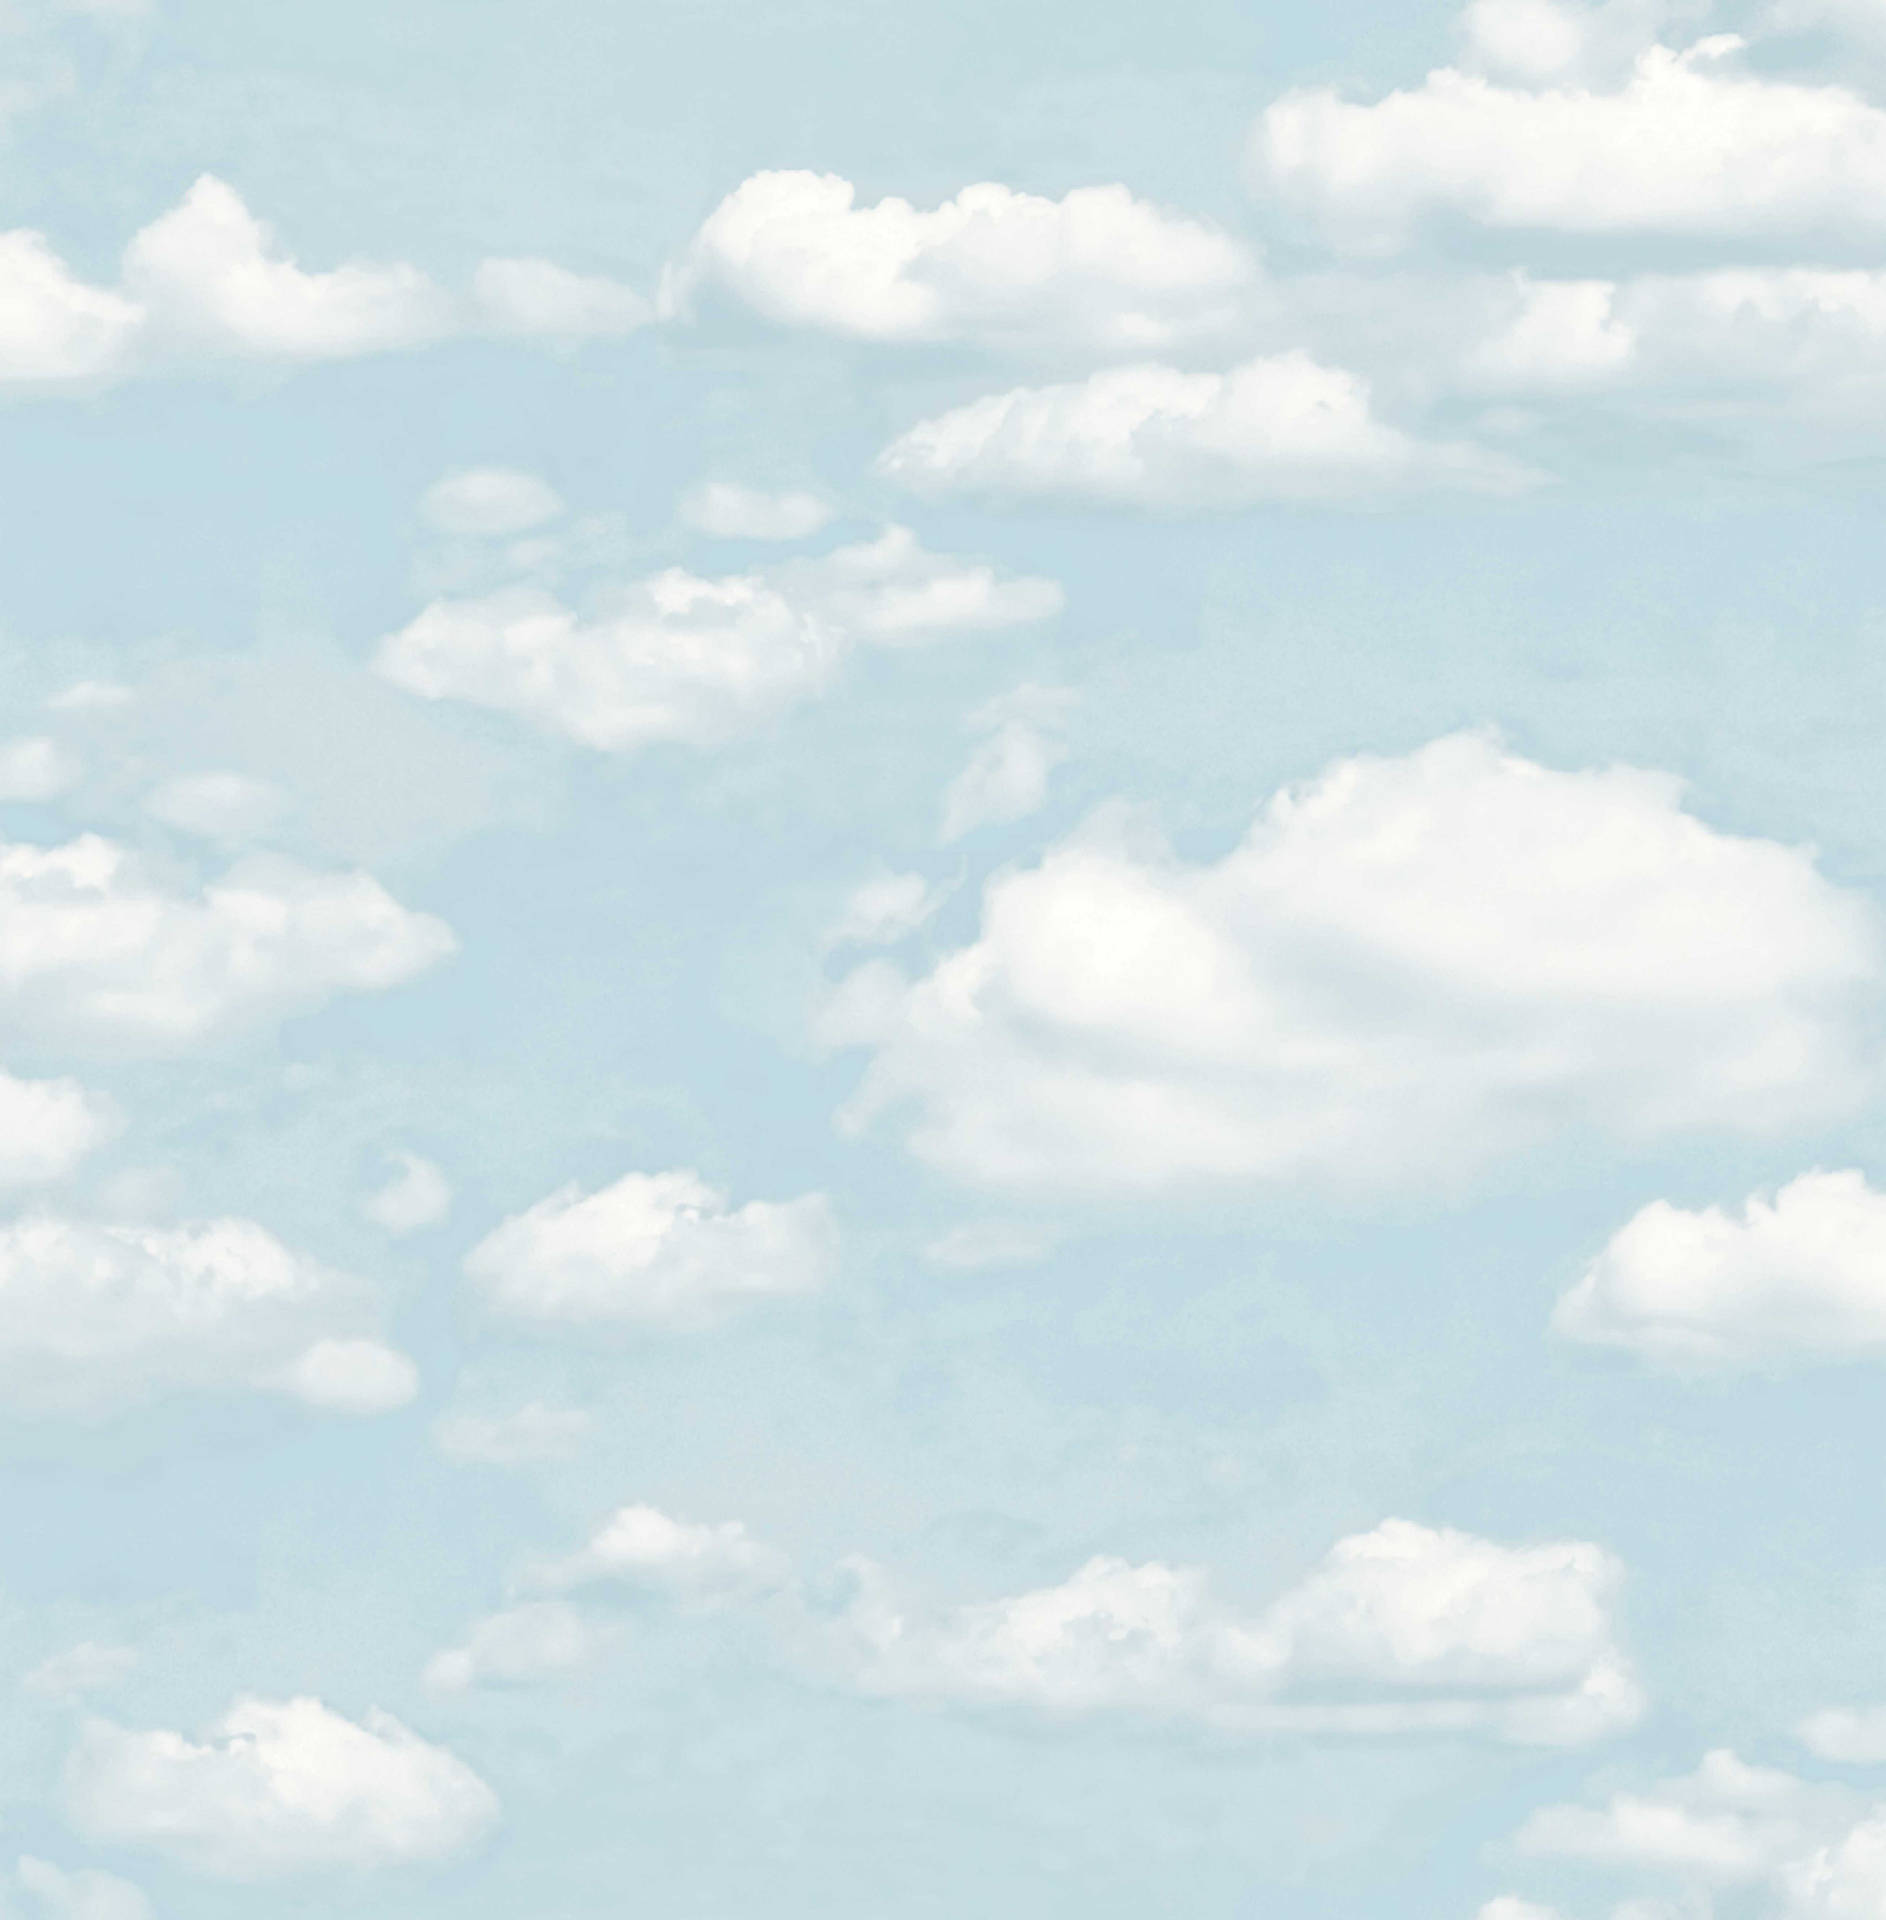 Cloud 3930X4000 Wallpaper and Background Image